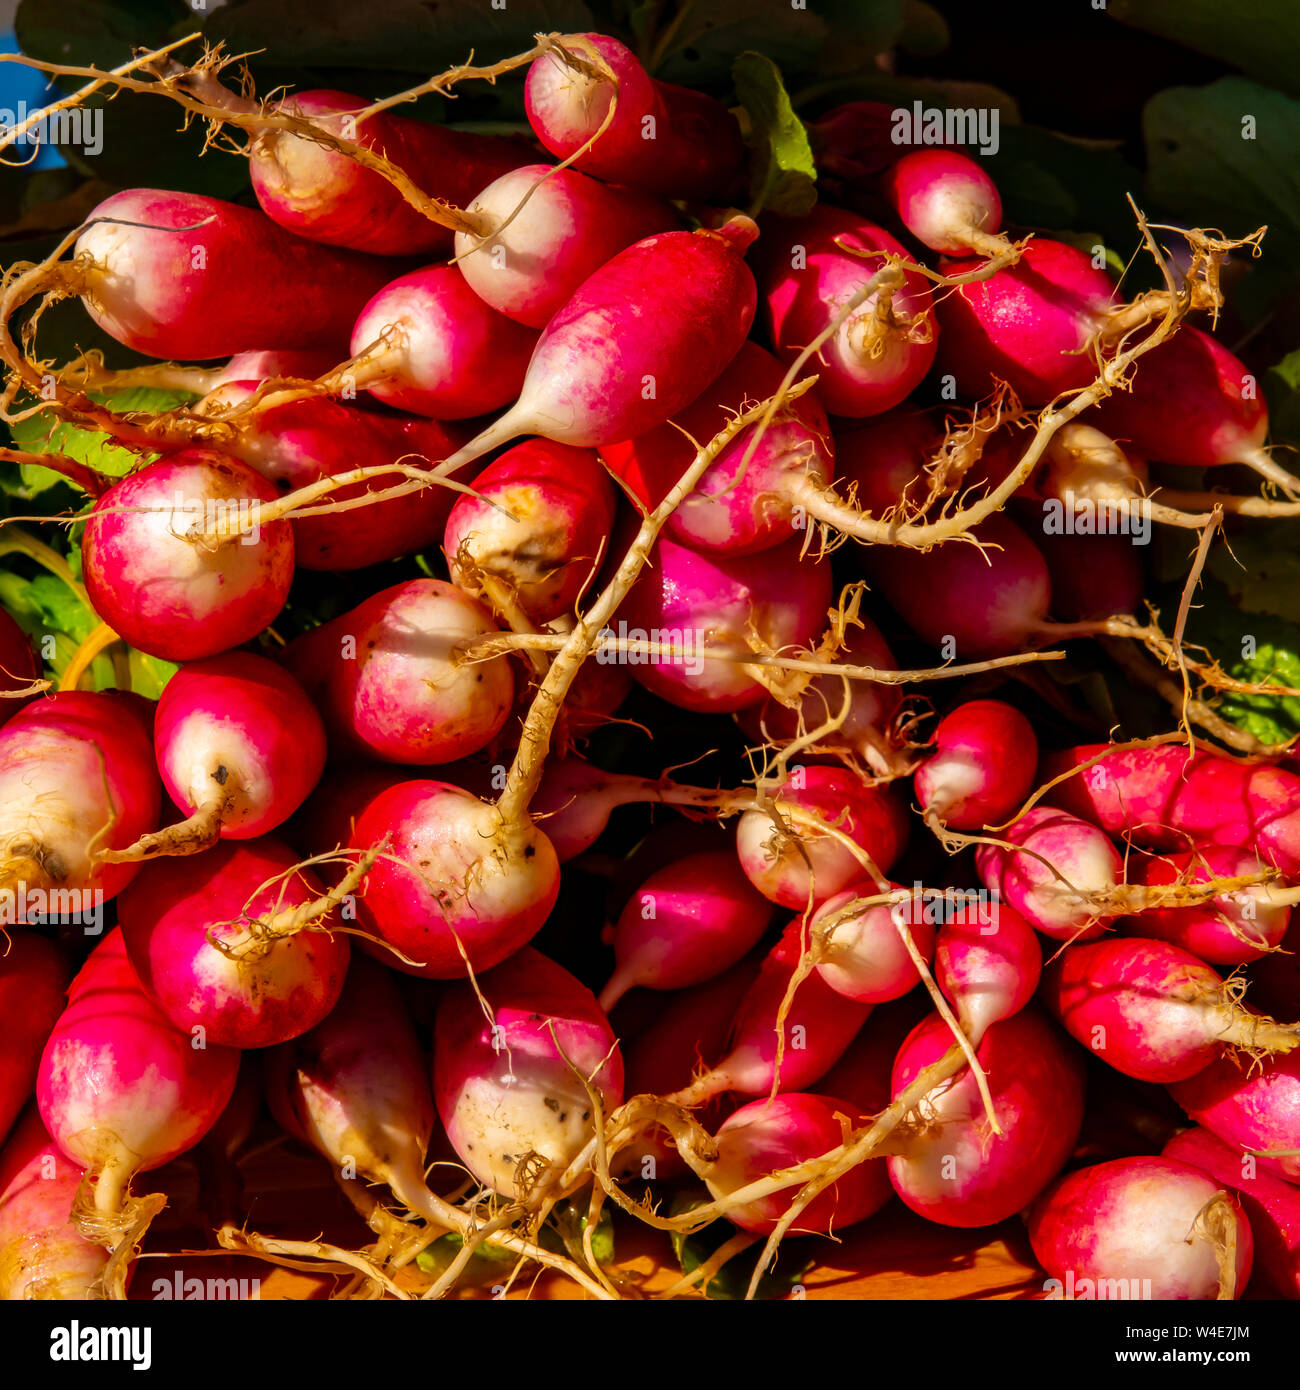 Fresh picked bunch of red radishes on table for sale Stock Photo